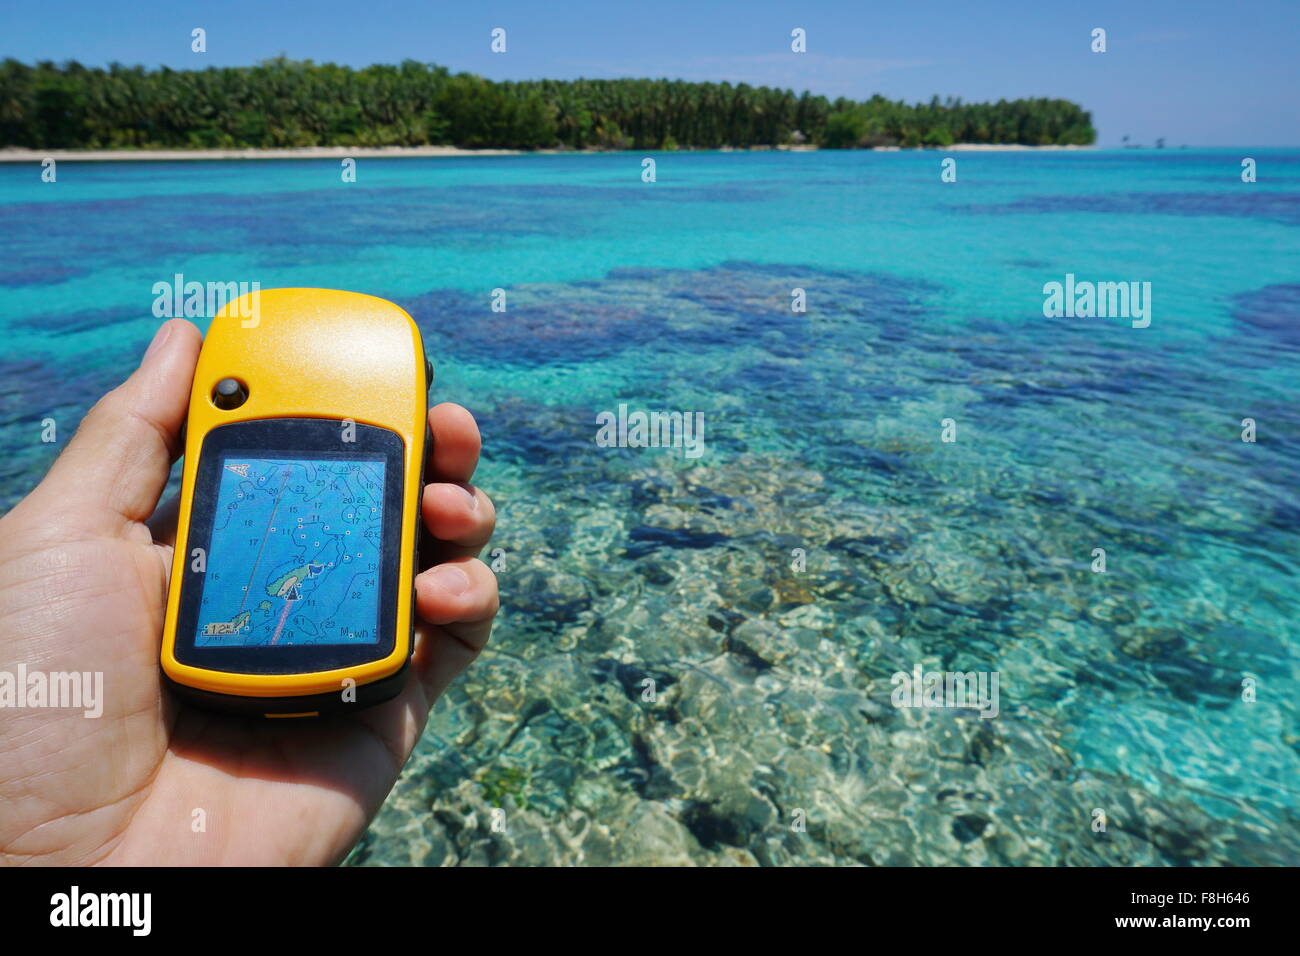 https://c8.alamy.com/comp/F8H646/gps-satellite-navigator-in-hand-over-blurred-sea-with-coral-reef-under-F8H646.jpg